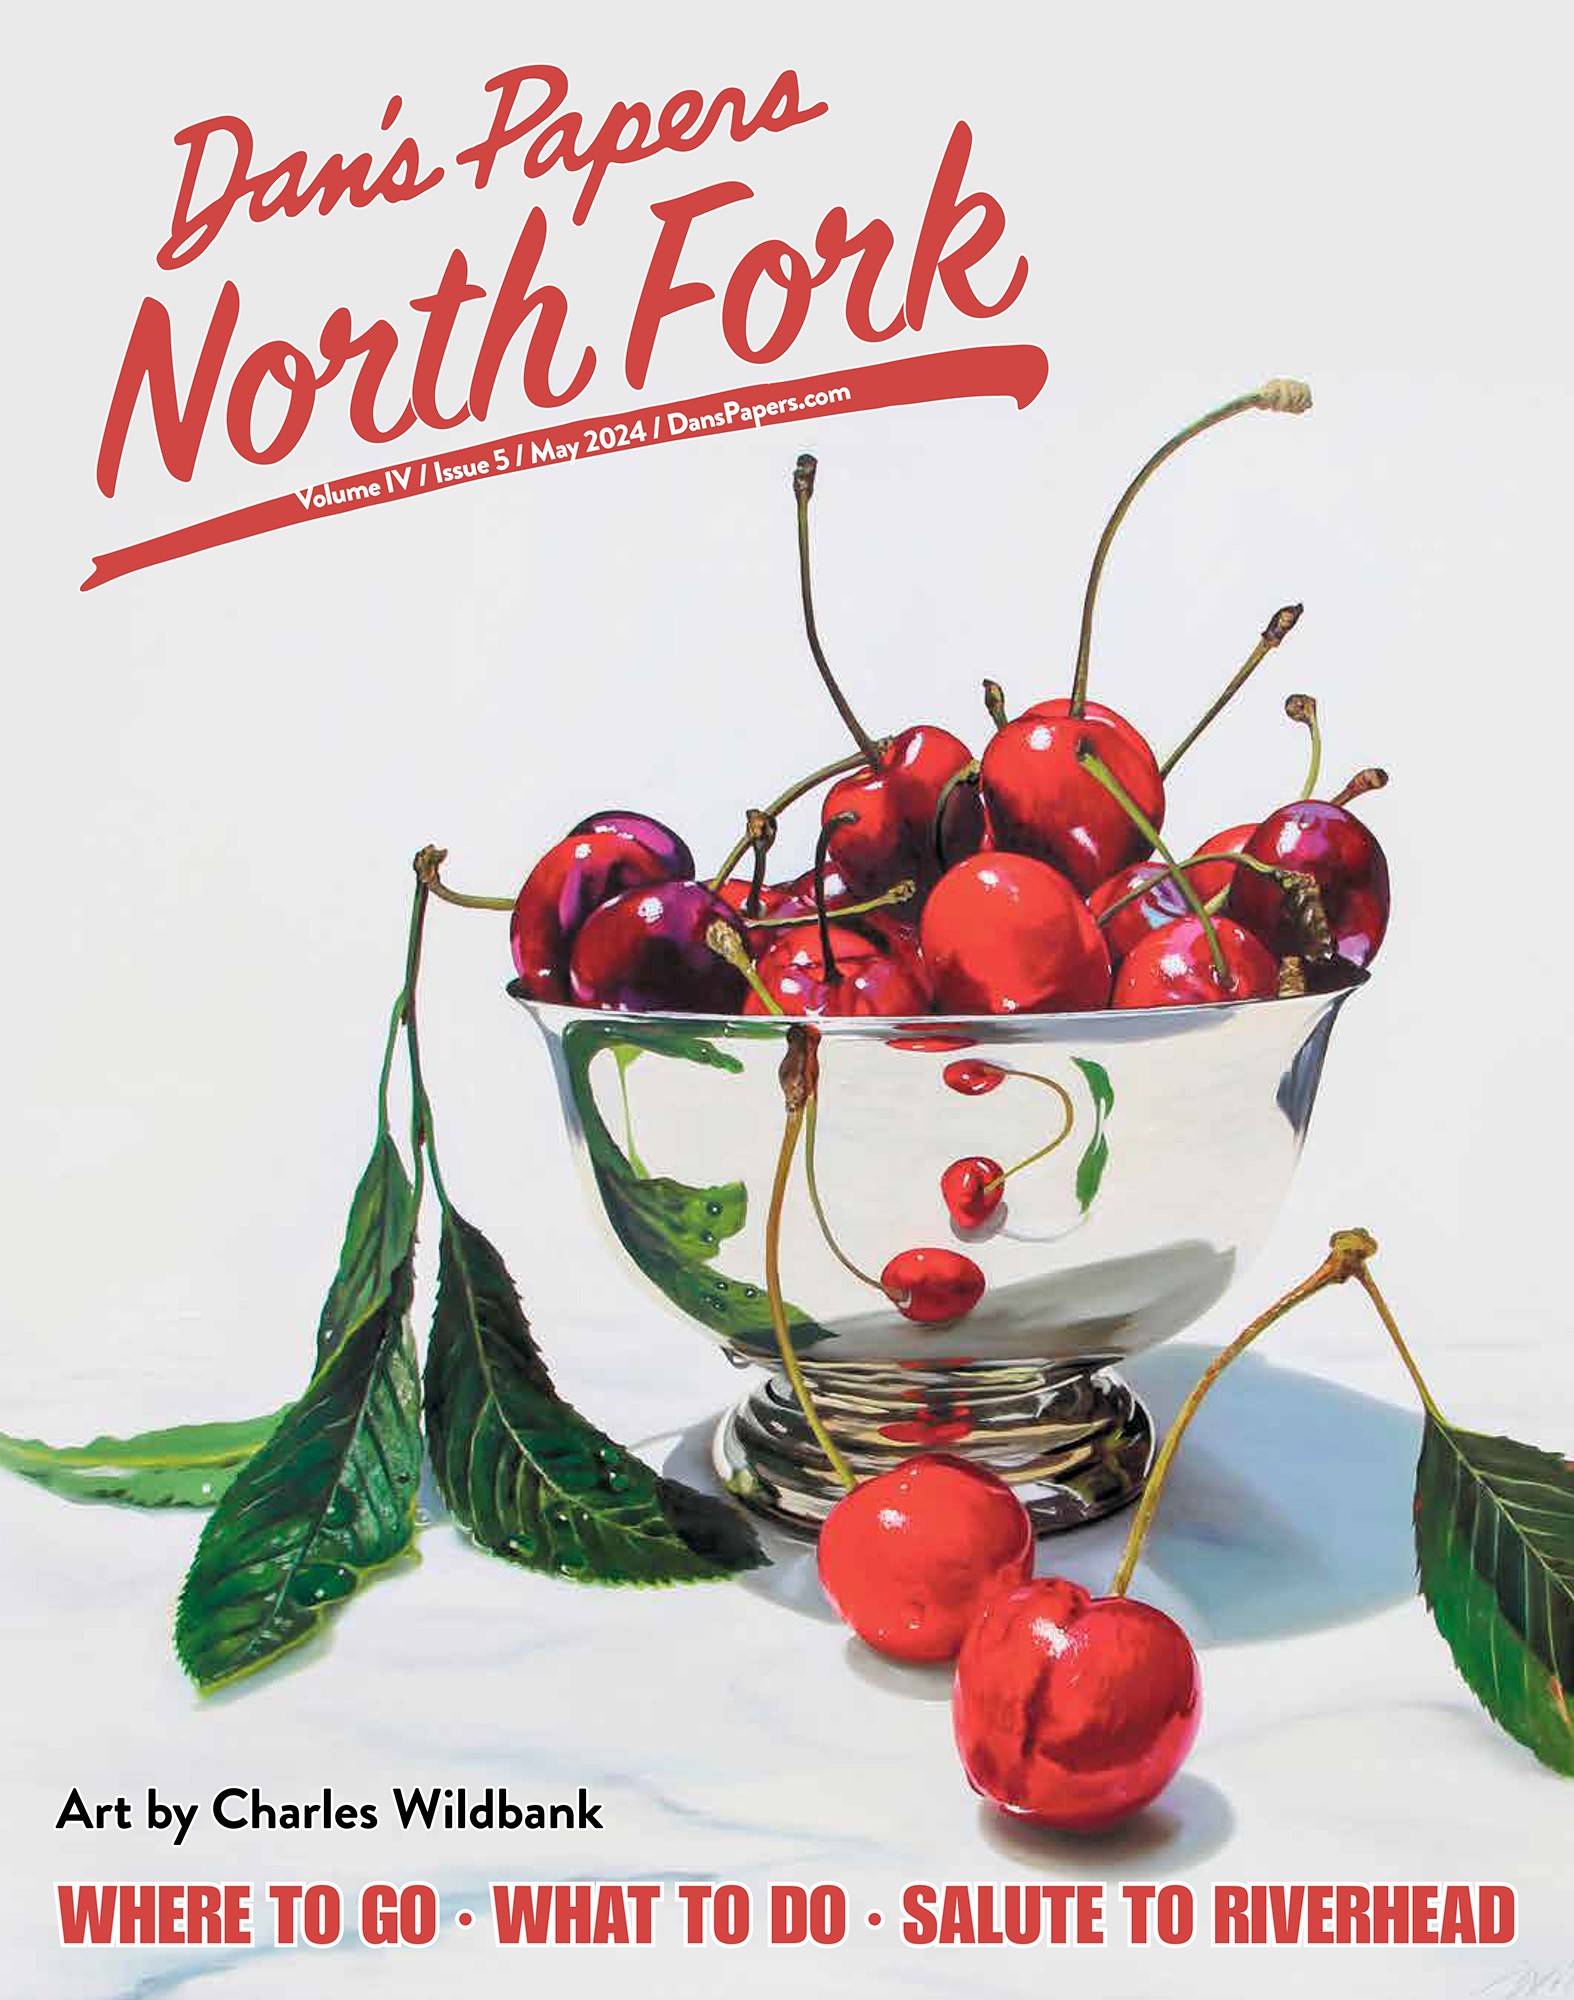 May 2024 Dan's Papers North Fork cover art by Charles Wildbank